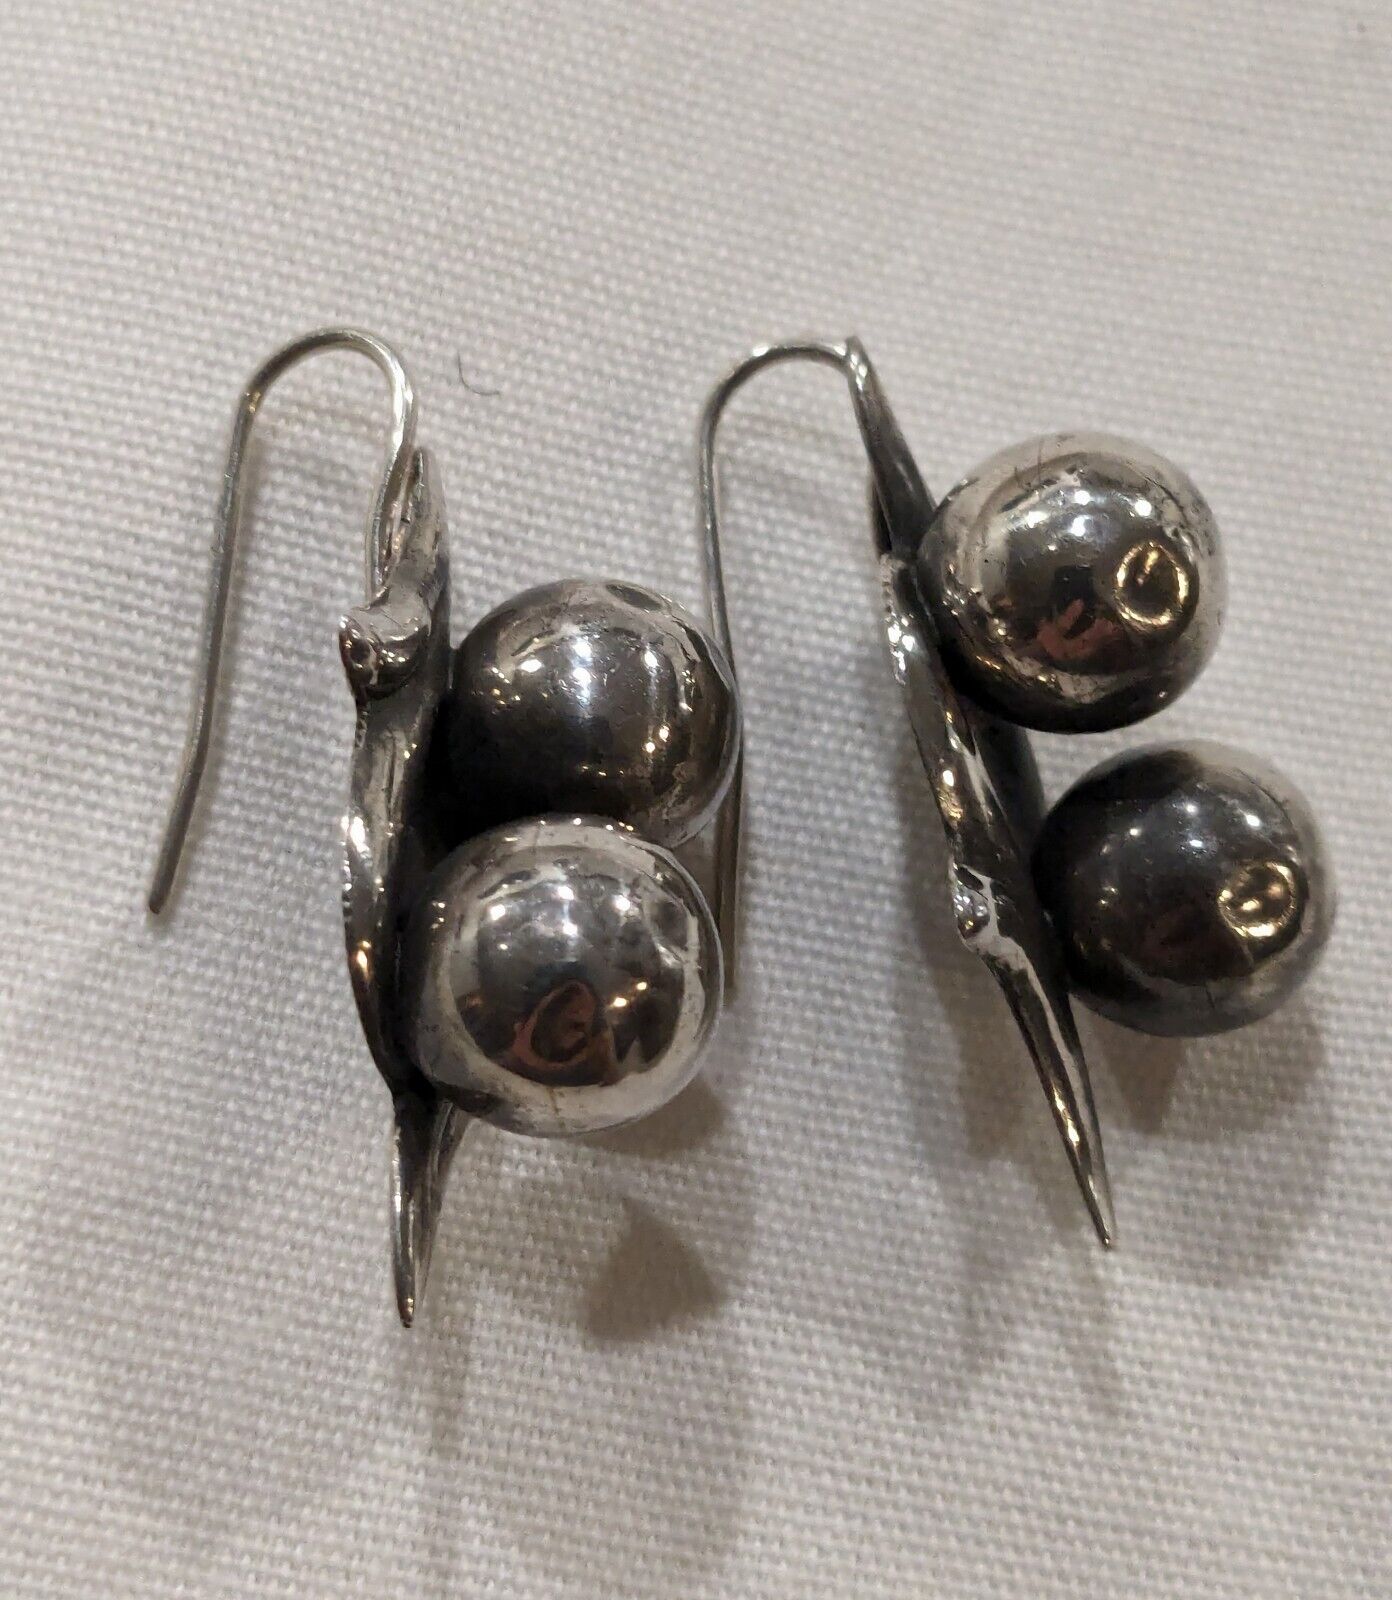 VINTAGE Collectible MEXICAN TAXCO SILVER  BALL Drop EARRINGS with EAR WIRES